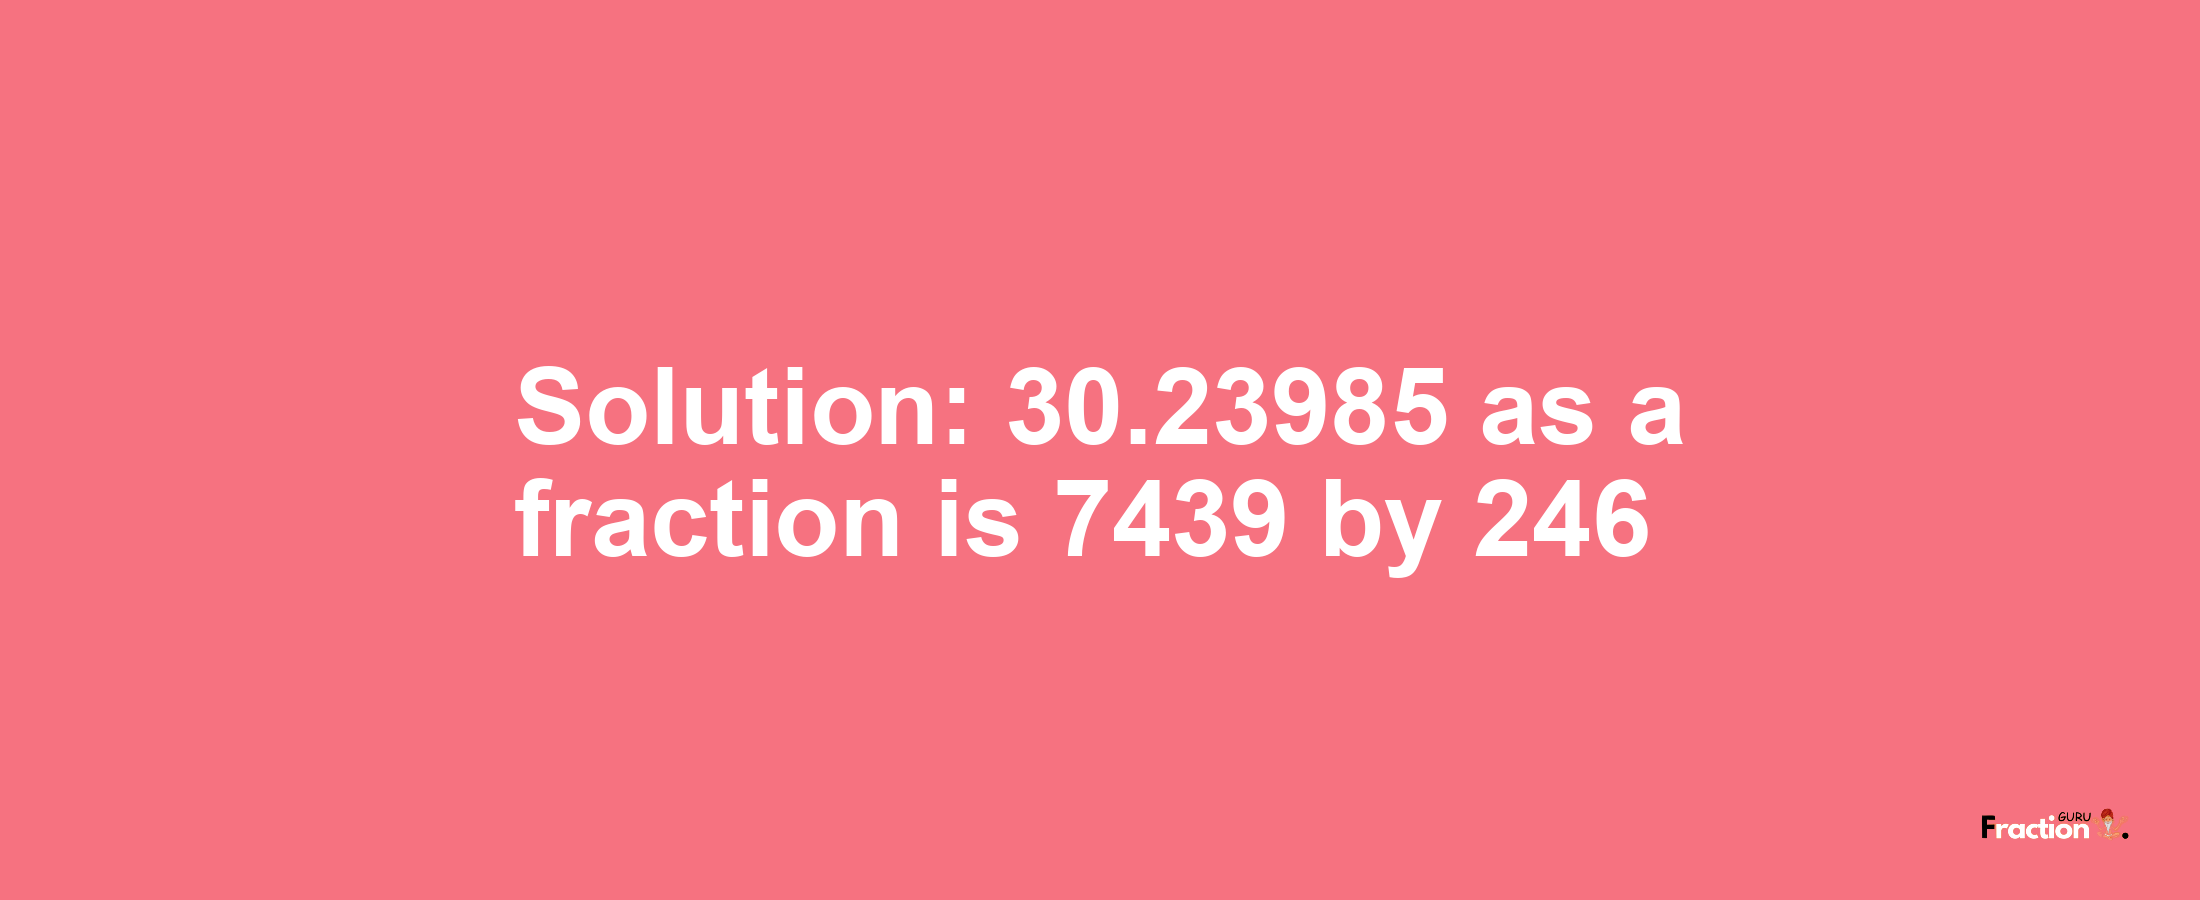 Solution:30.23985 as a fraction is 7439/246